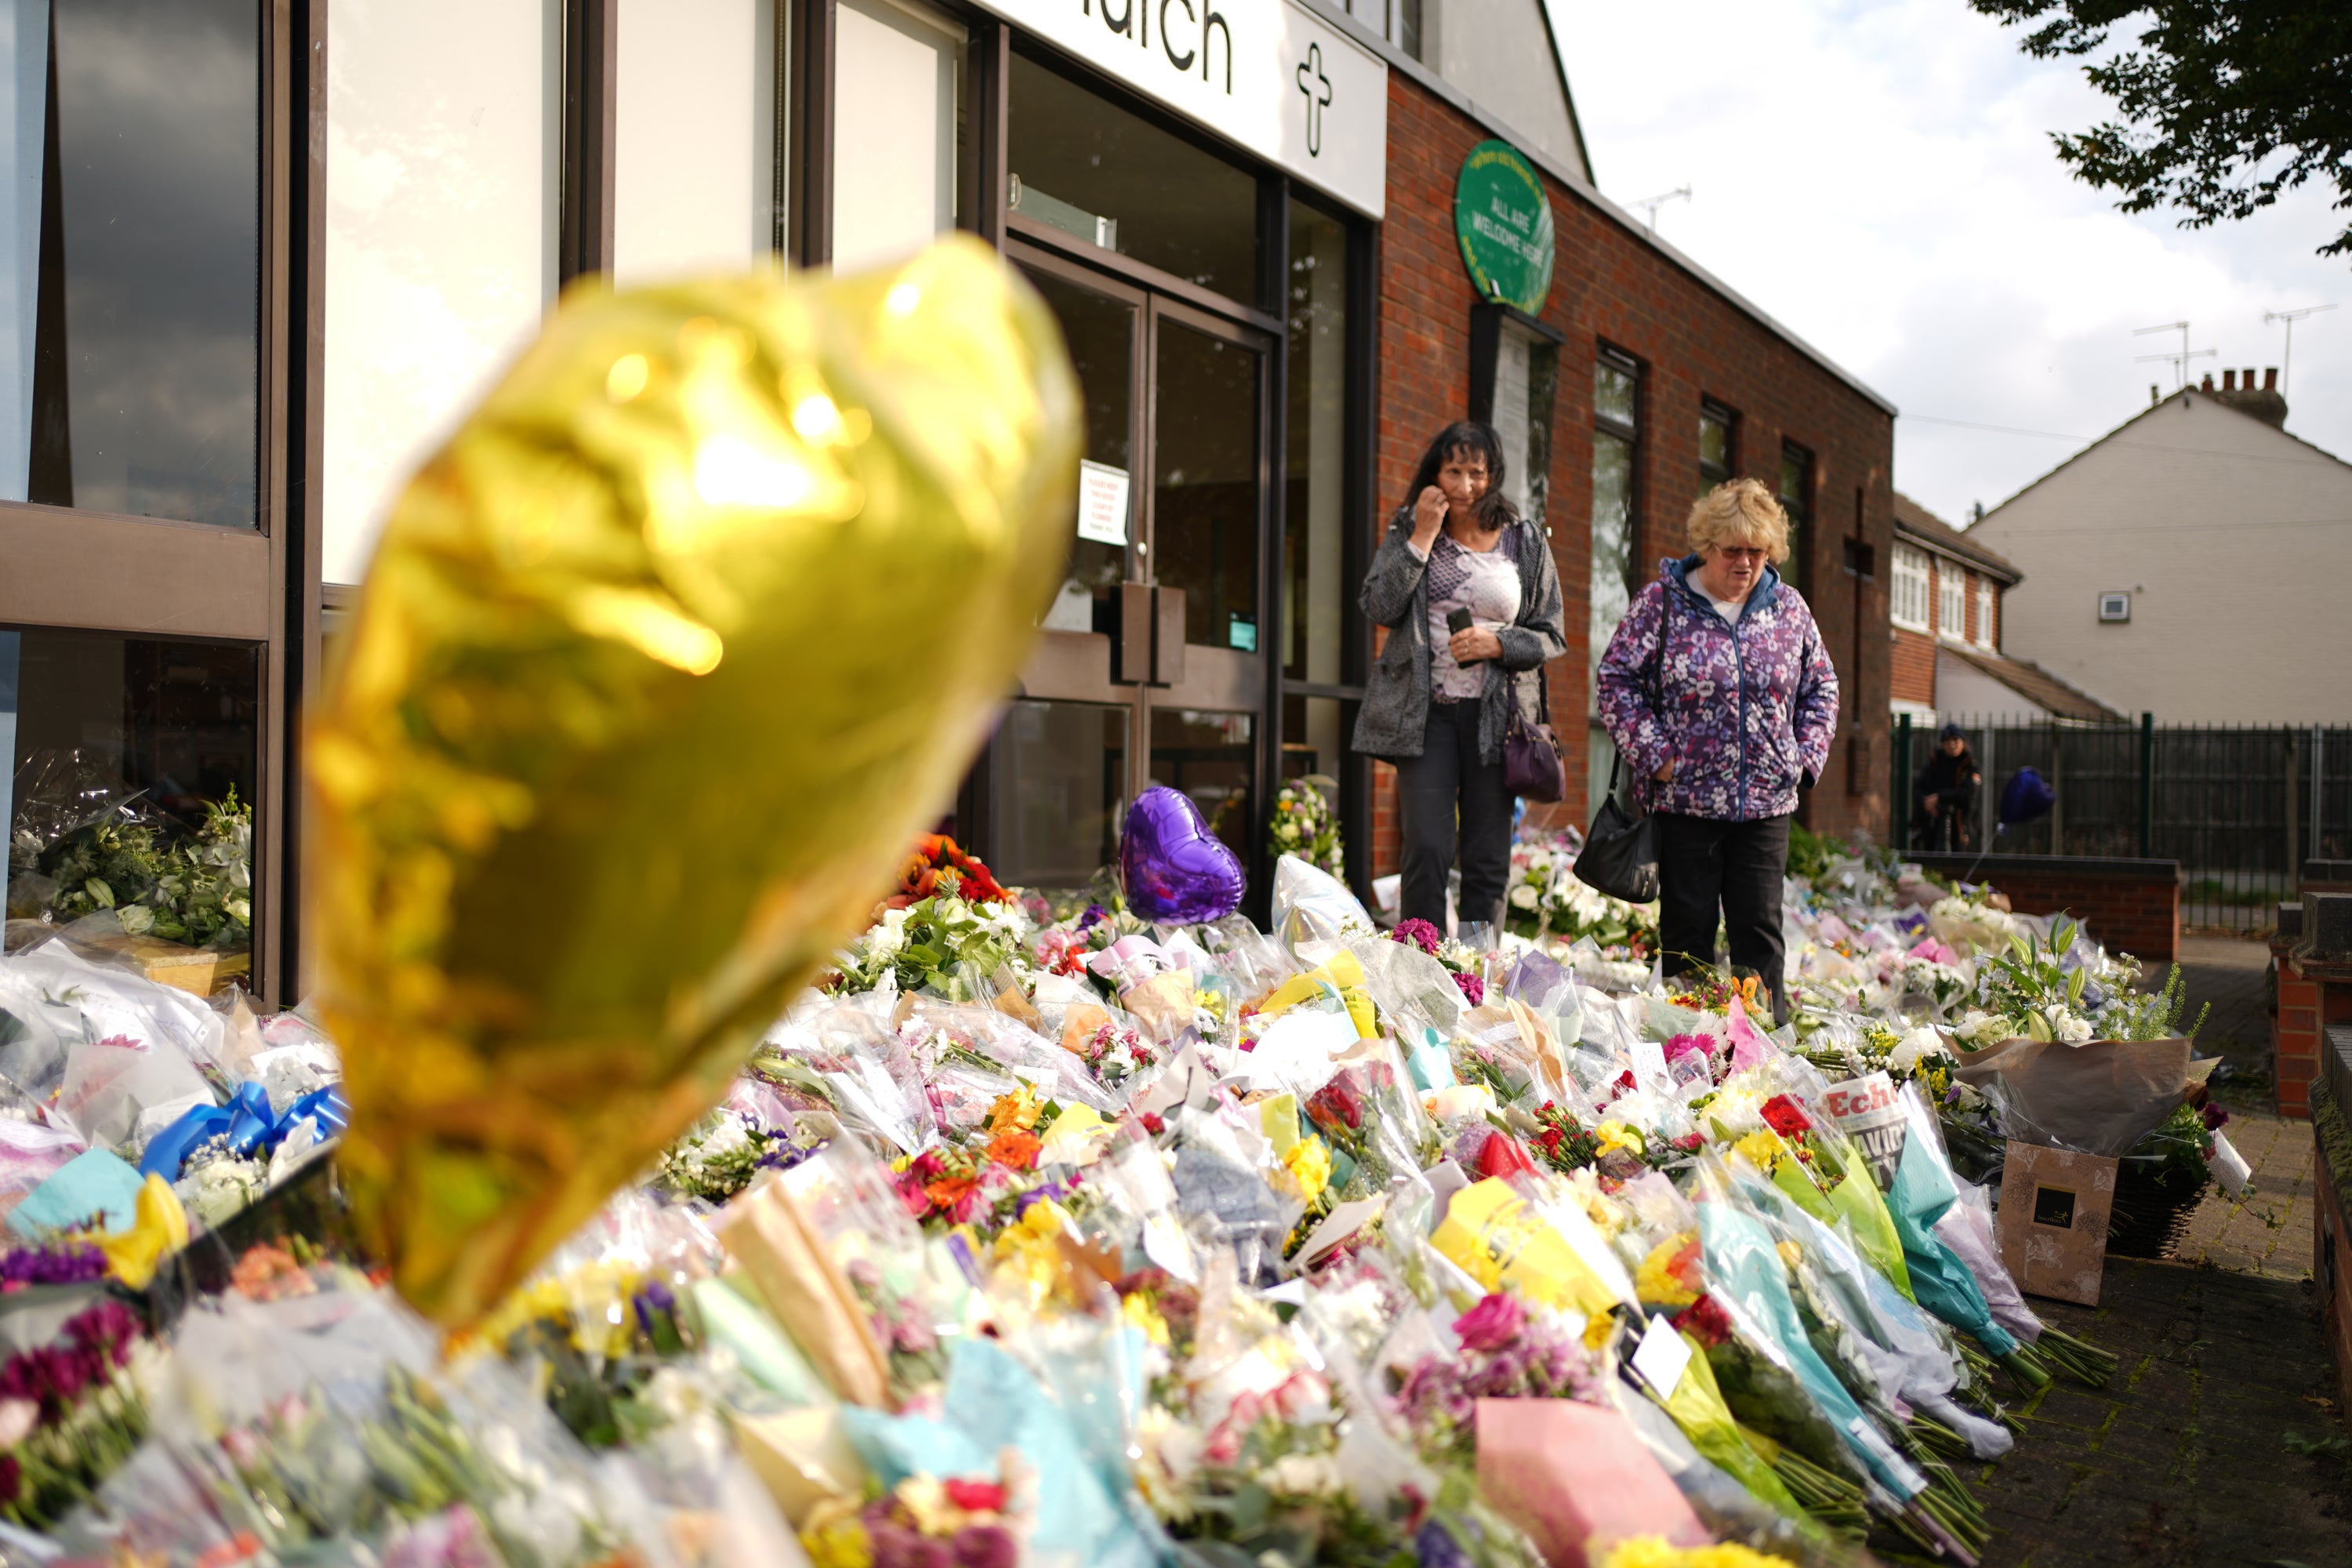 People look at the floral tributes left outside the Belfairs Methodist Church in Leigh-on-Sea